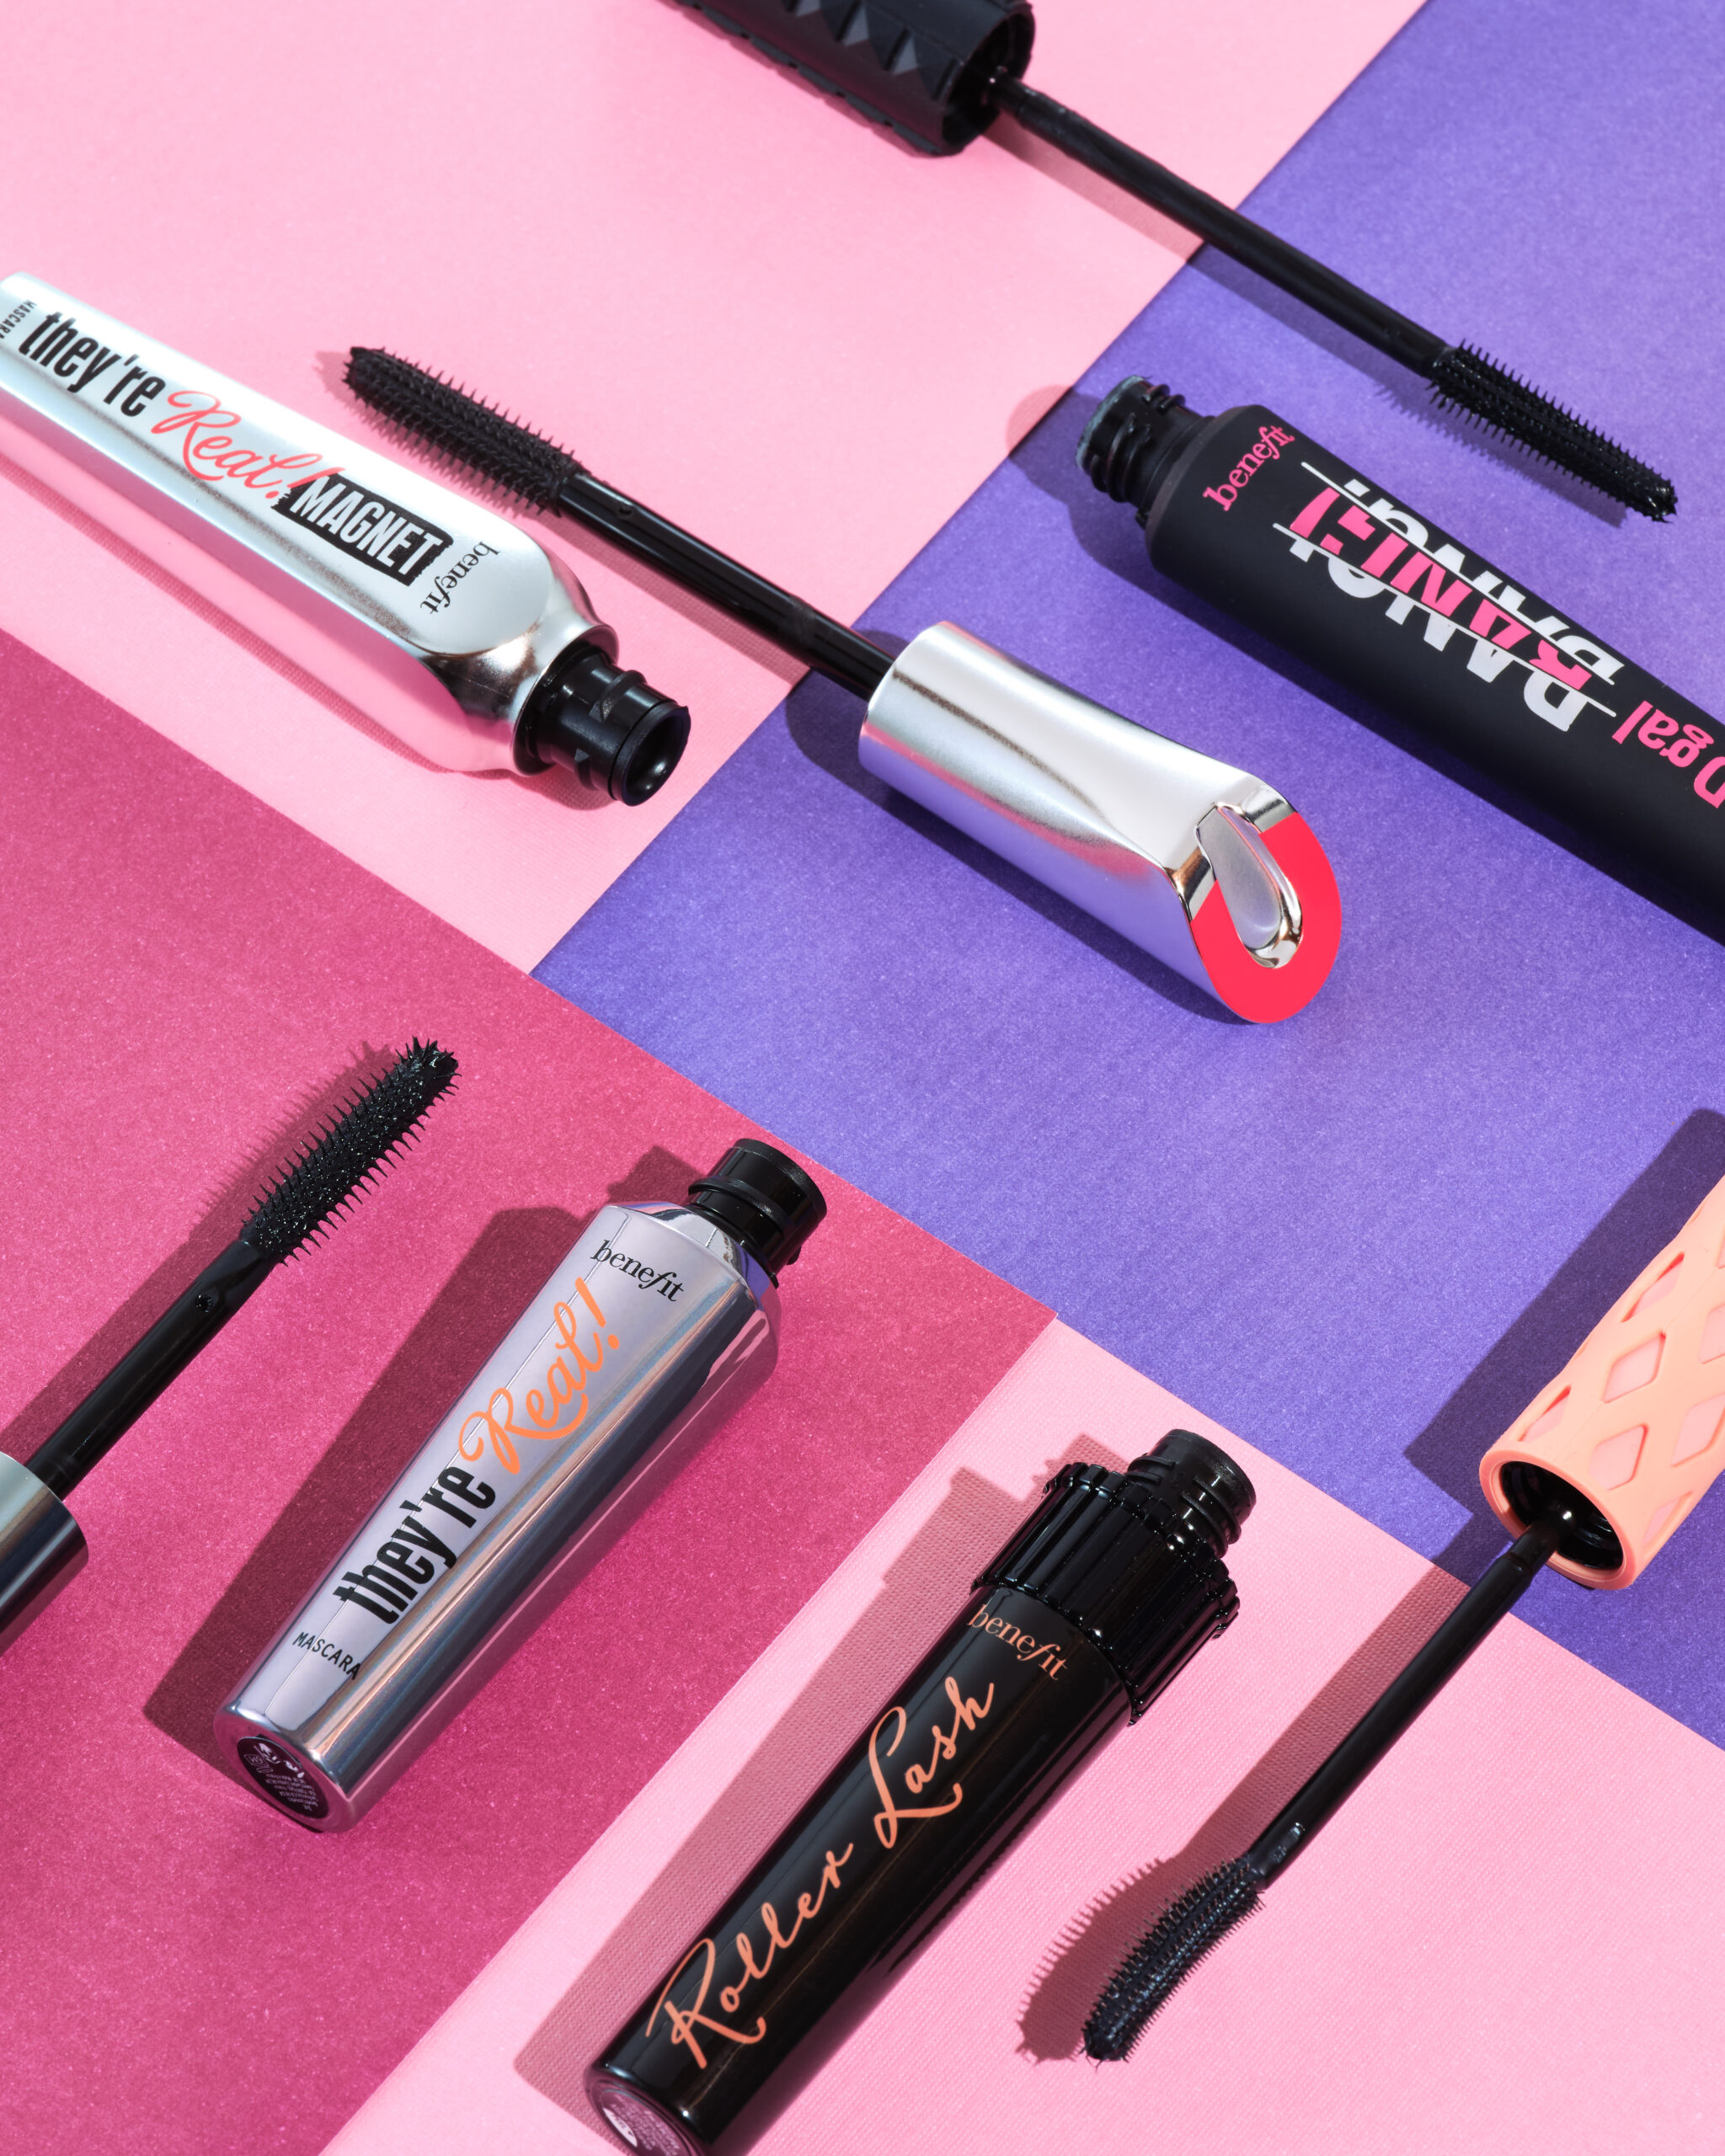 SALE ALERT: National Lash Day With Our Favorite Mascara Brands